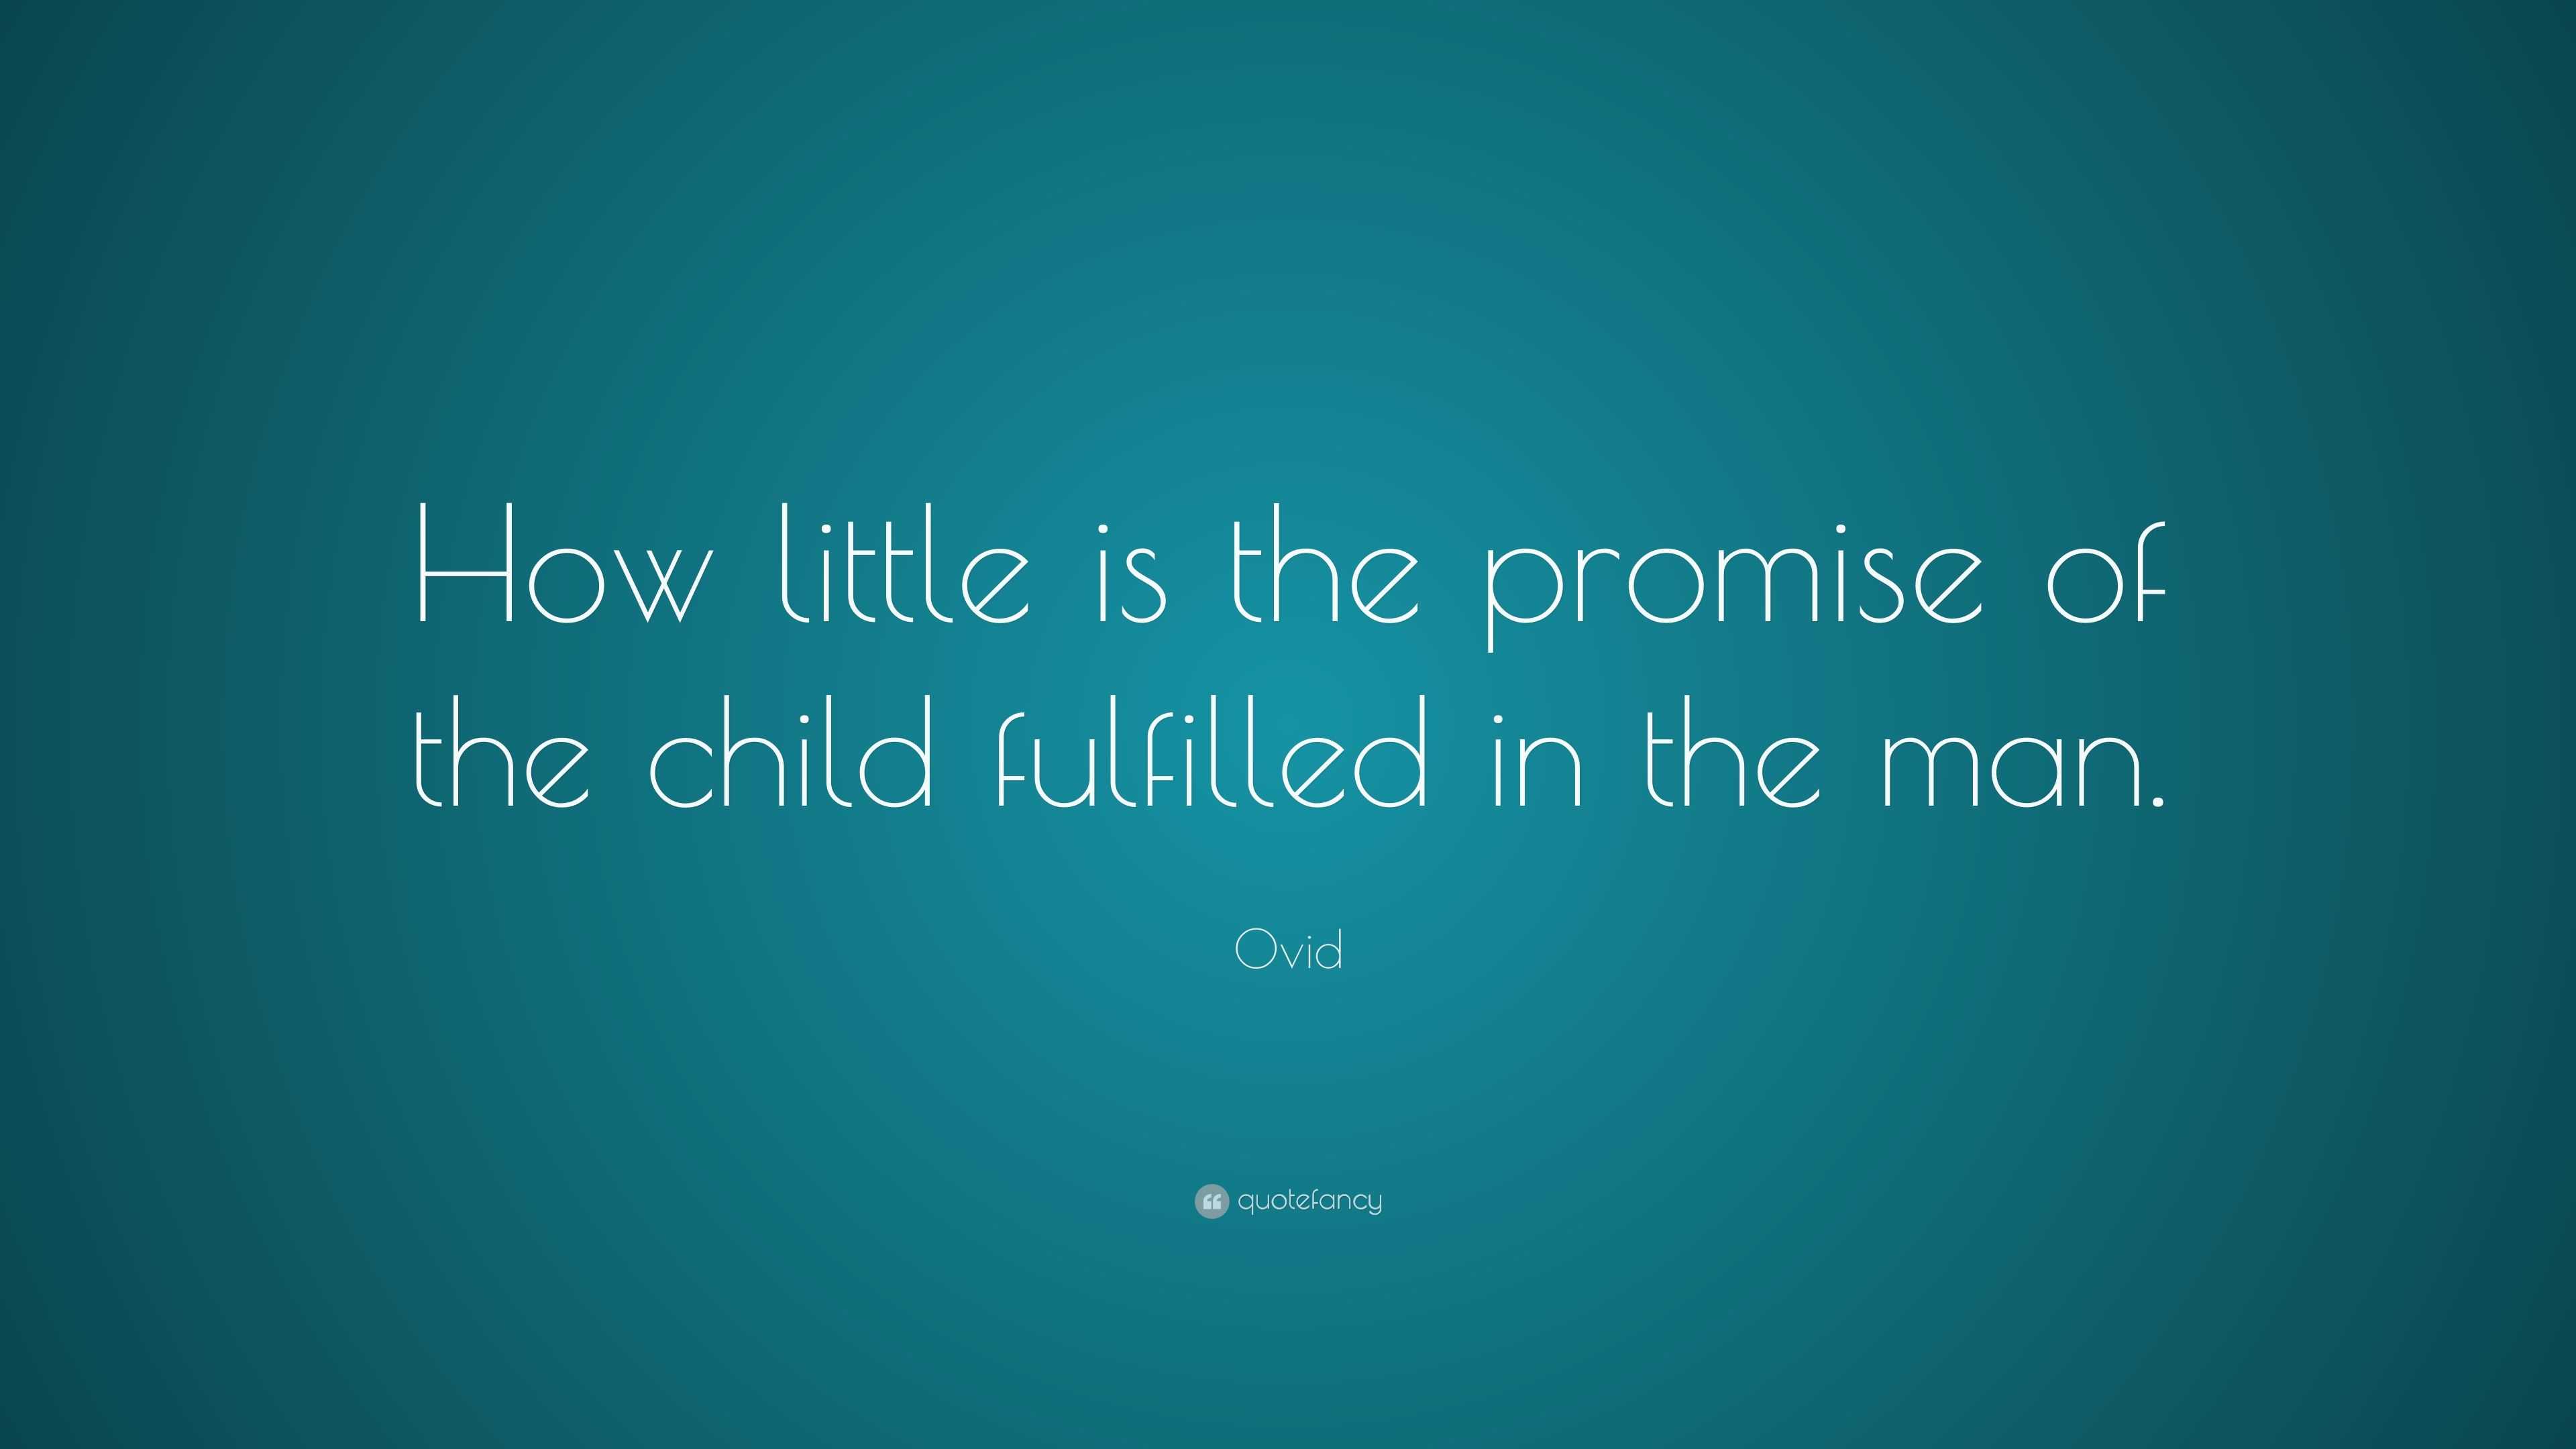 The Promise of a Child